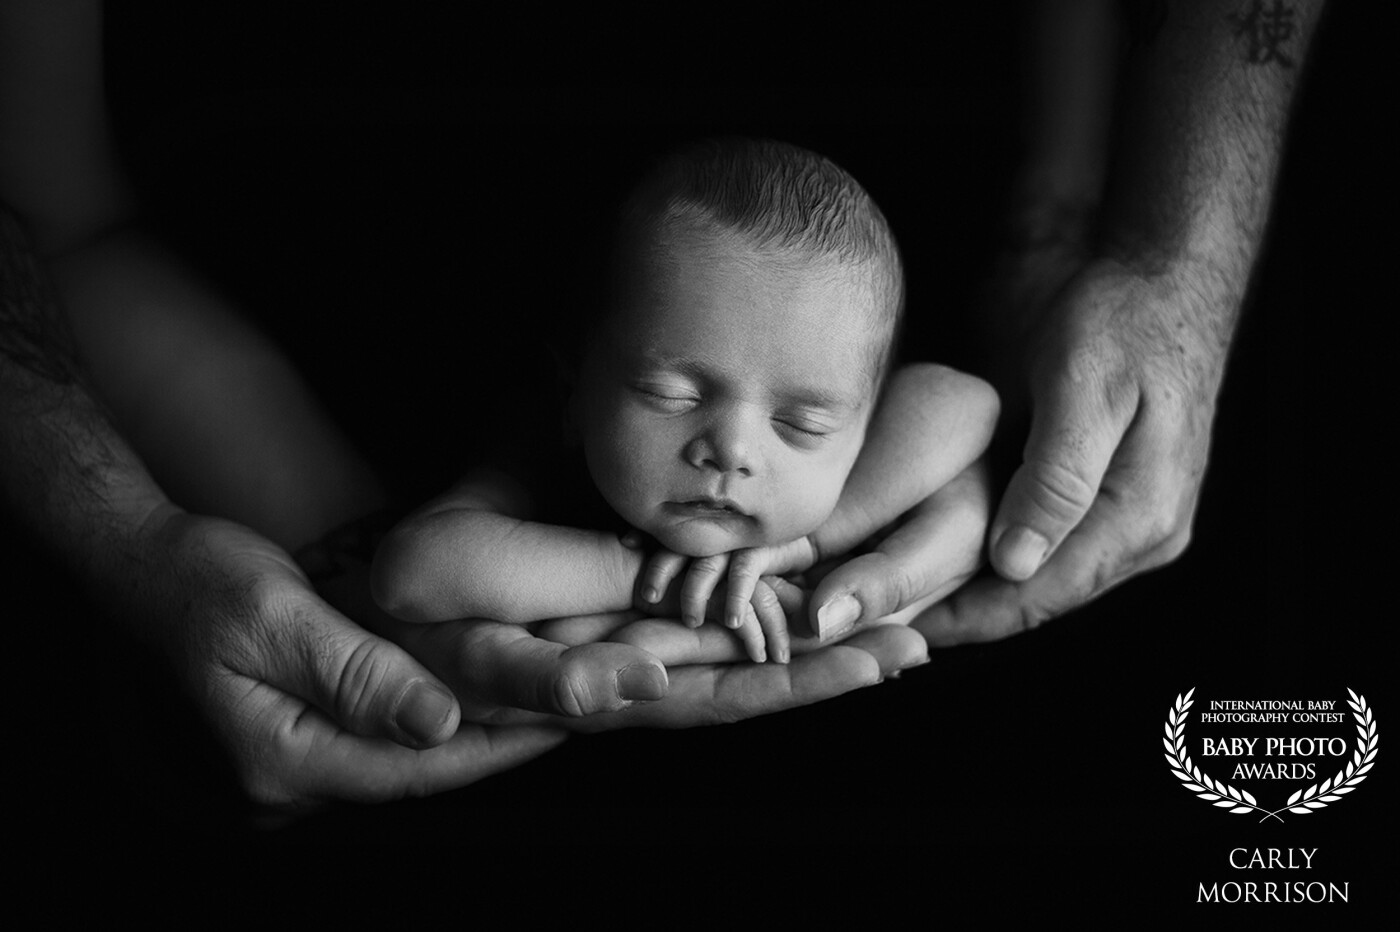 We always forget how tiny our children were as newborns when they are all grown up. That is why as a newborn photographer I always love using mom and dad's hands as reference to show how perfect and precious they really were. This little boy's mom and dad now have this beautiful memory to cherish forever on the wall in their home so they can remember those tiny fingers forever and ever.